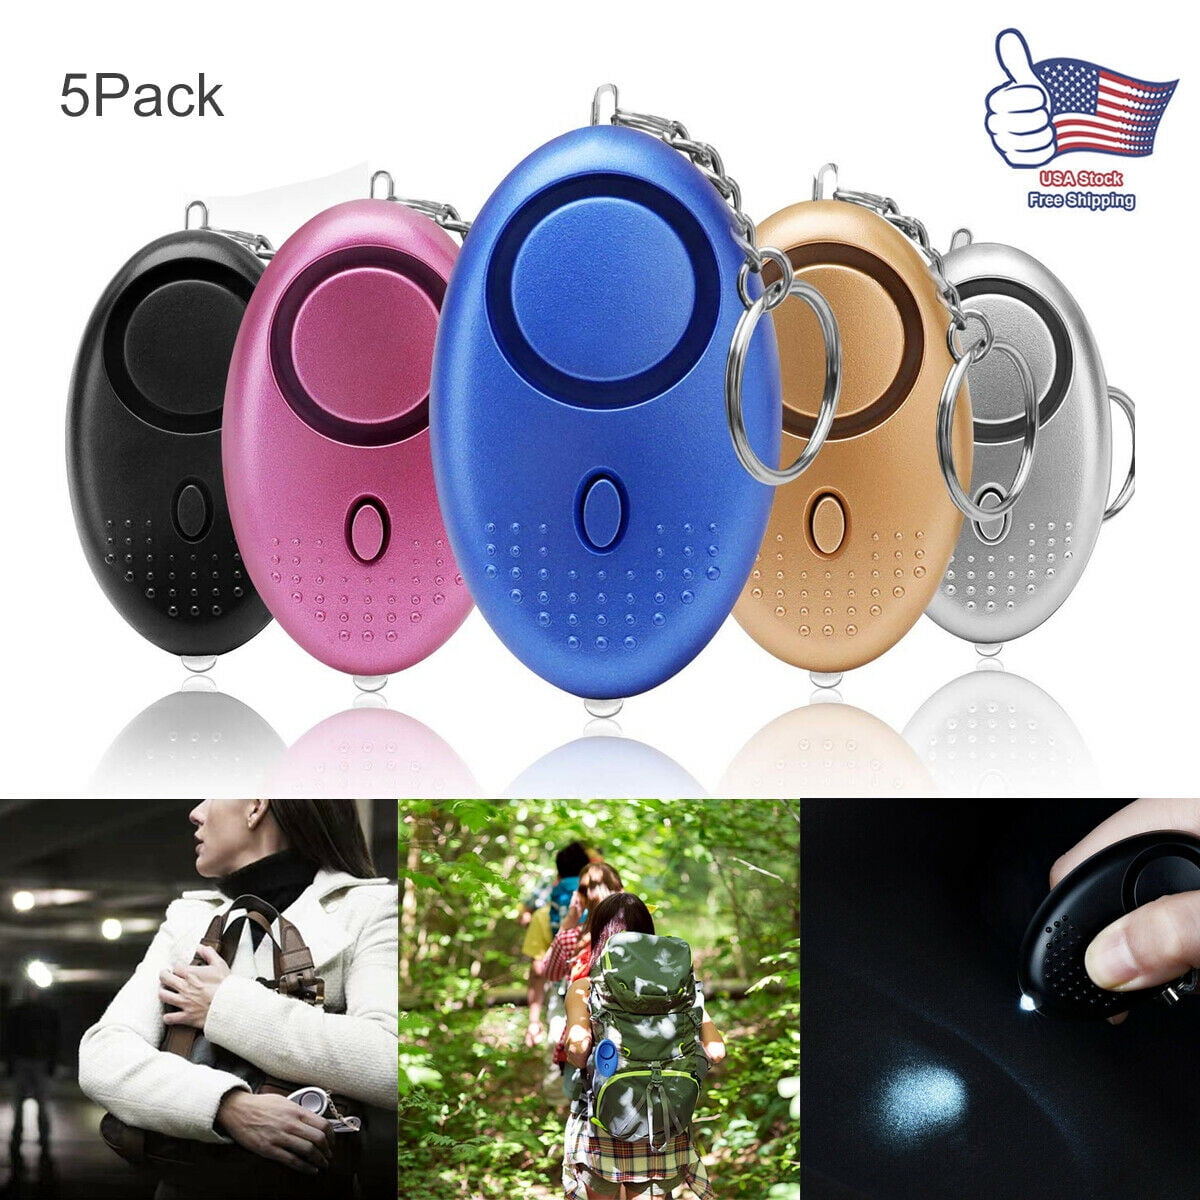 140DB Emergency US 5-10 Packs Safe Sound Personal Alarm Keychain With LED Light 